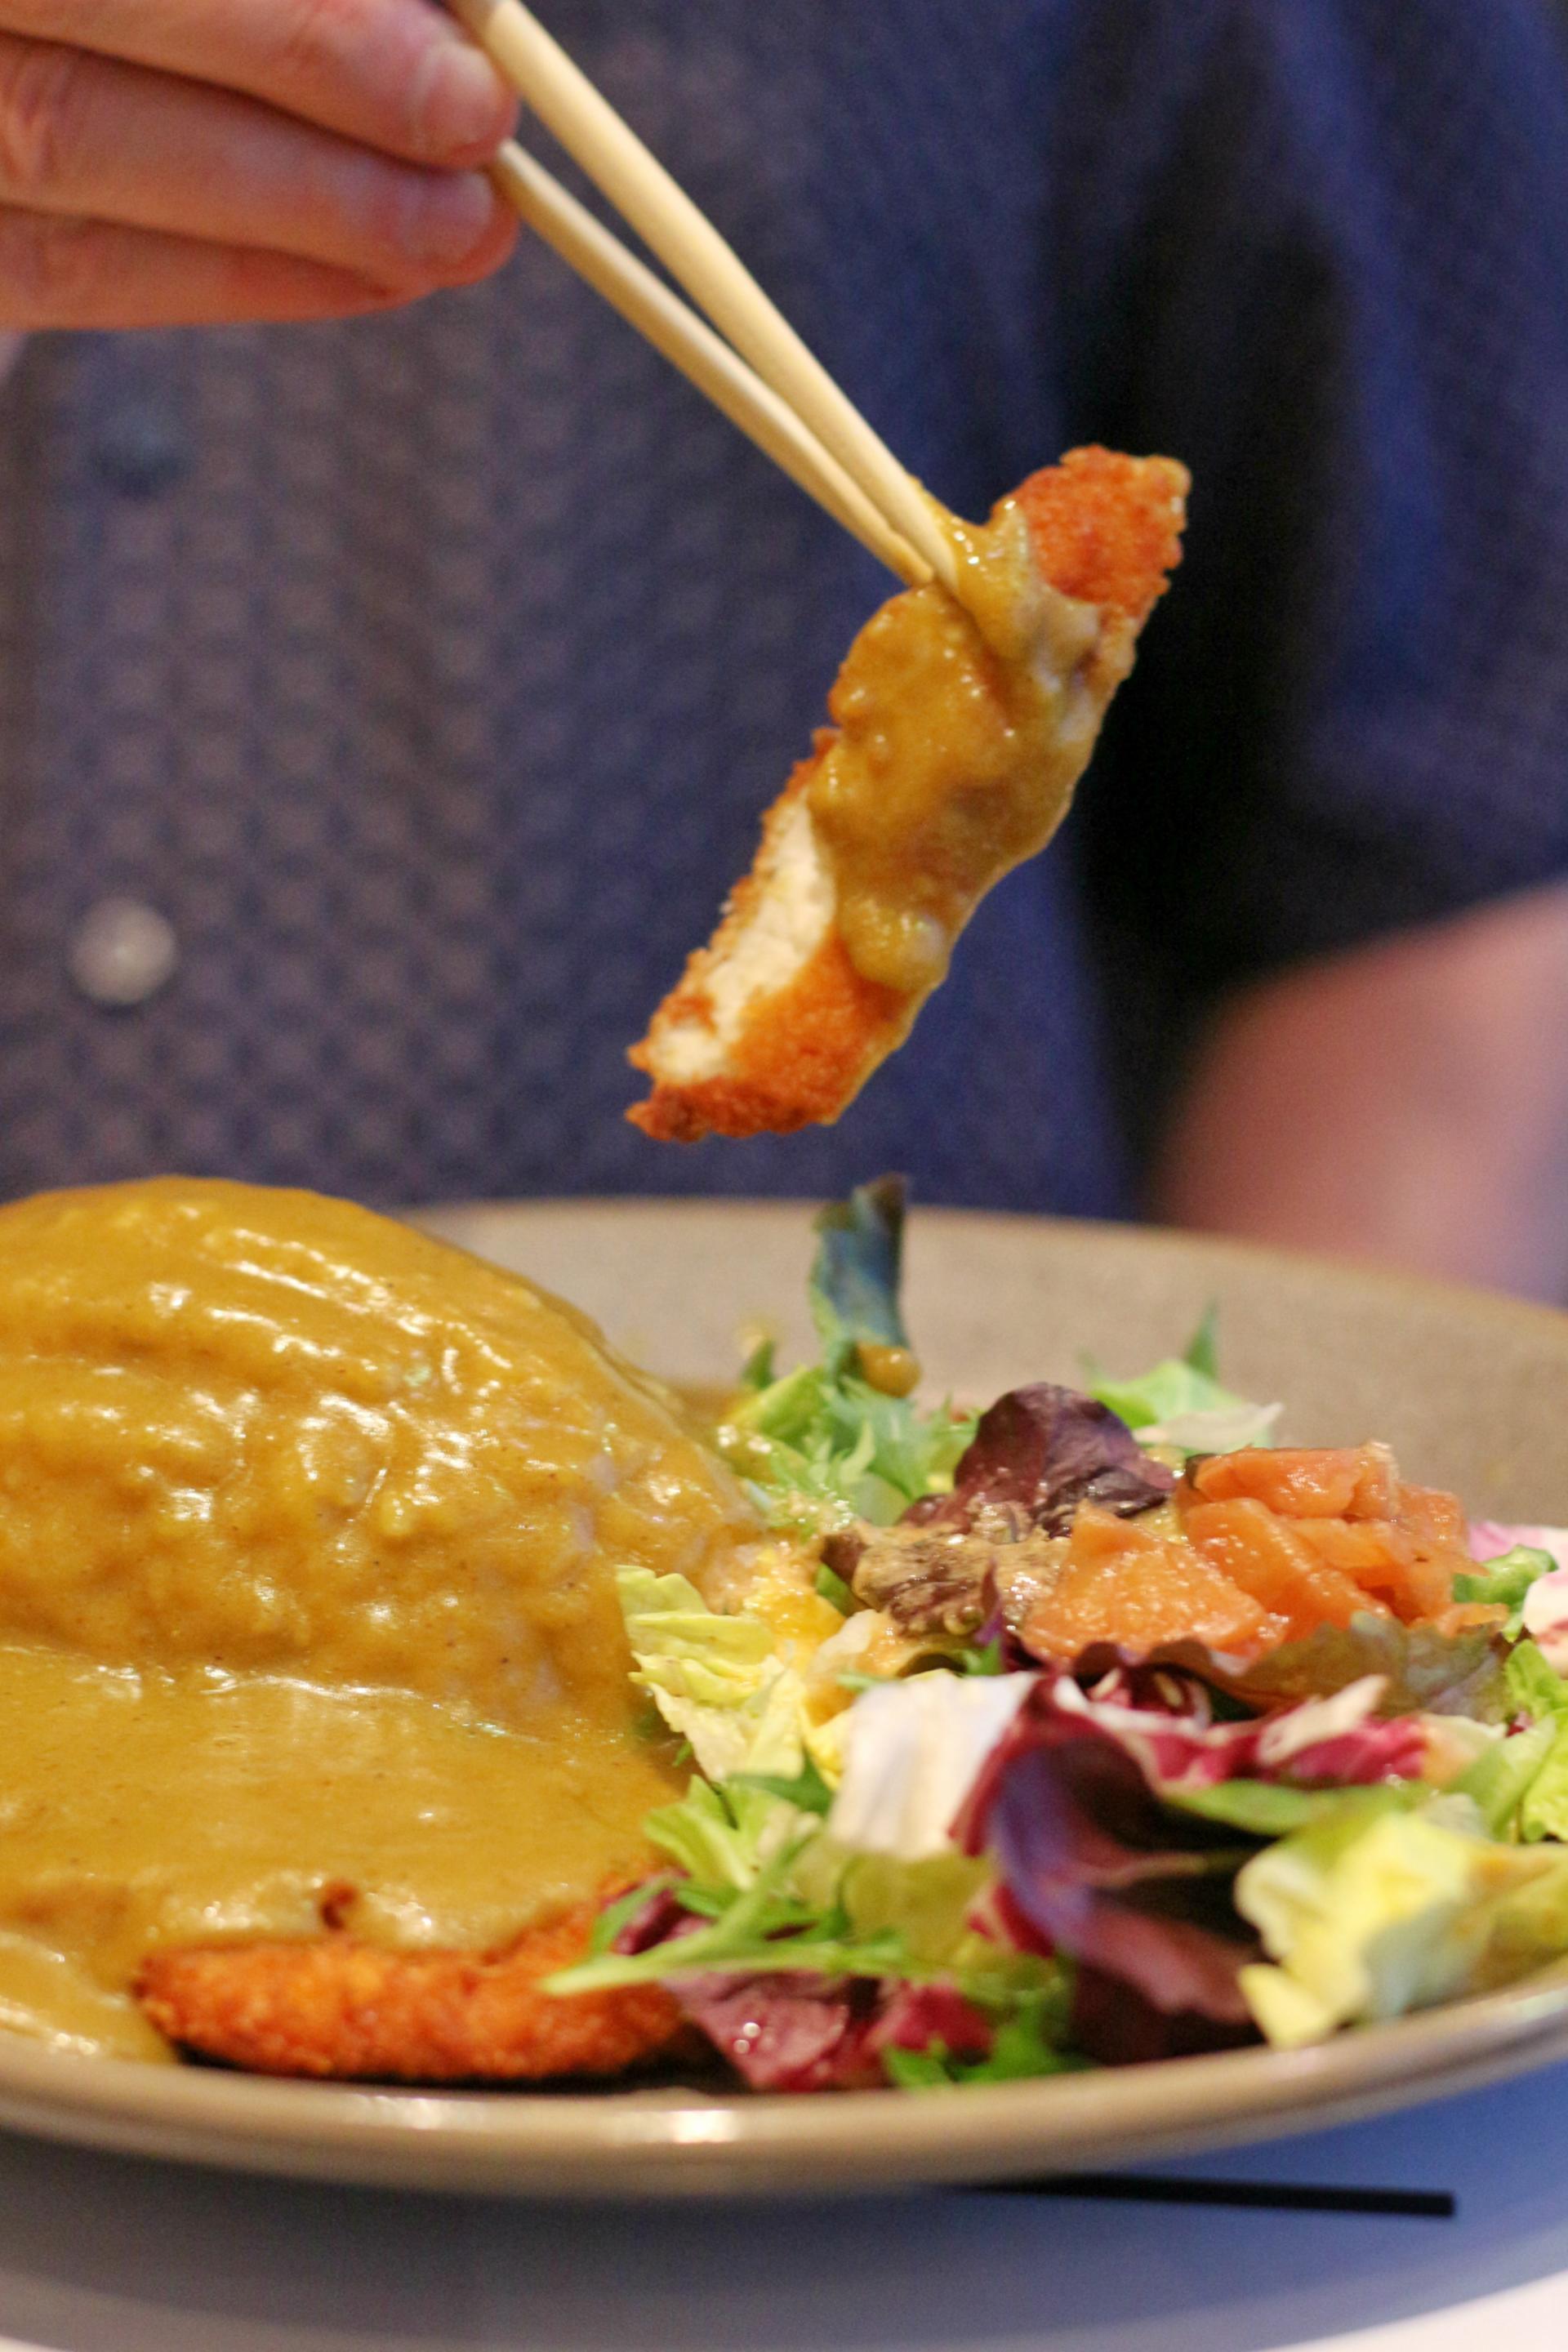 Wagamas Media City Salford Lowry Restaurant Review Pictures